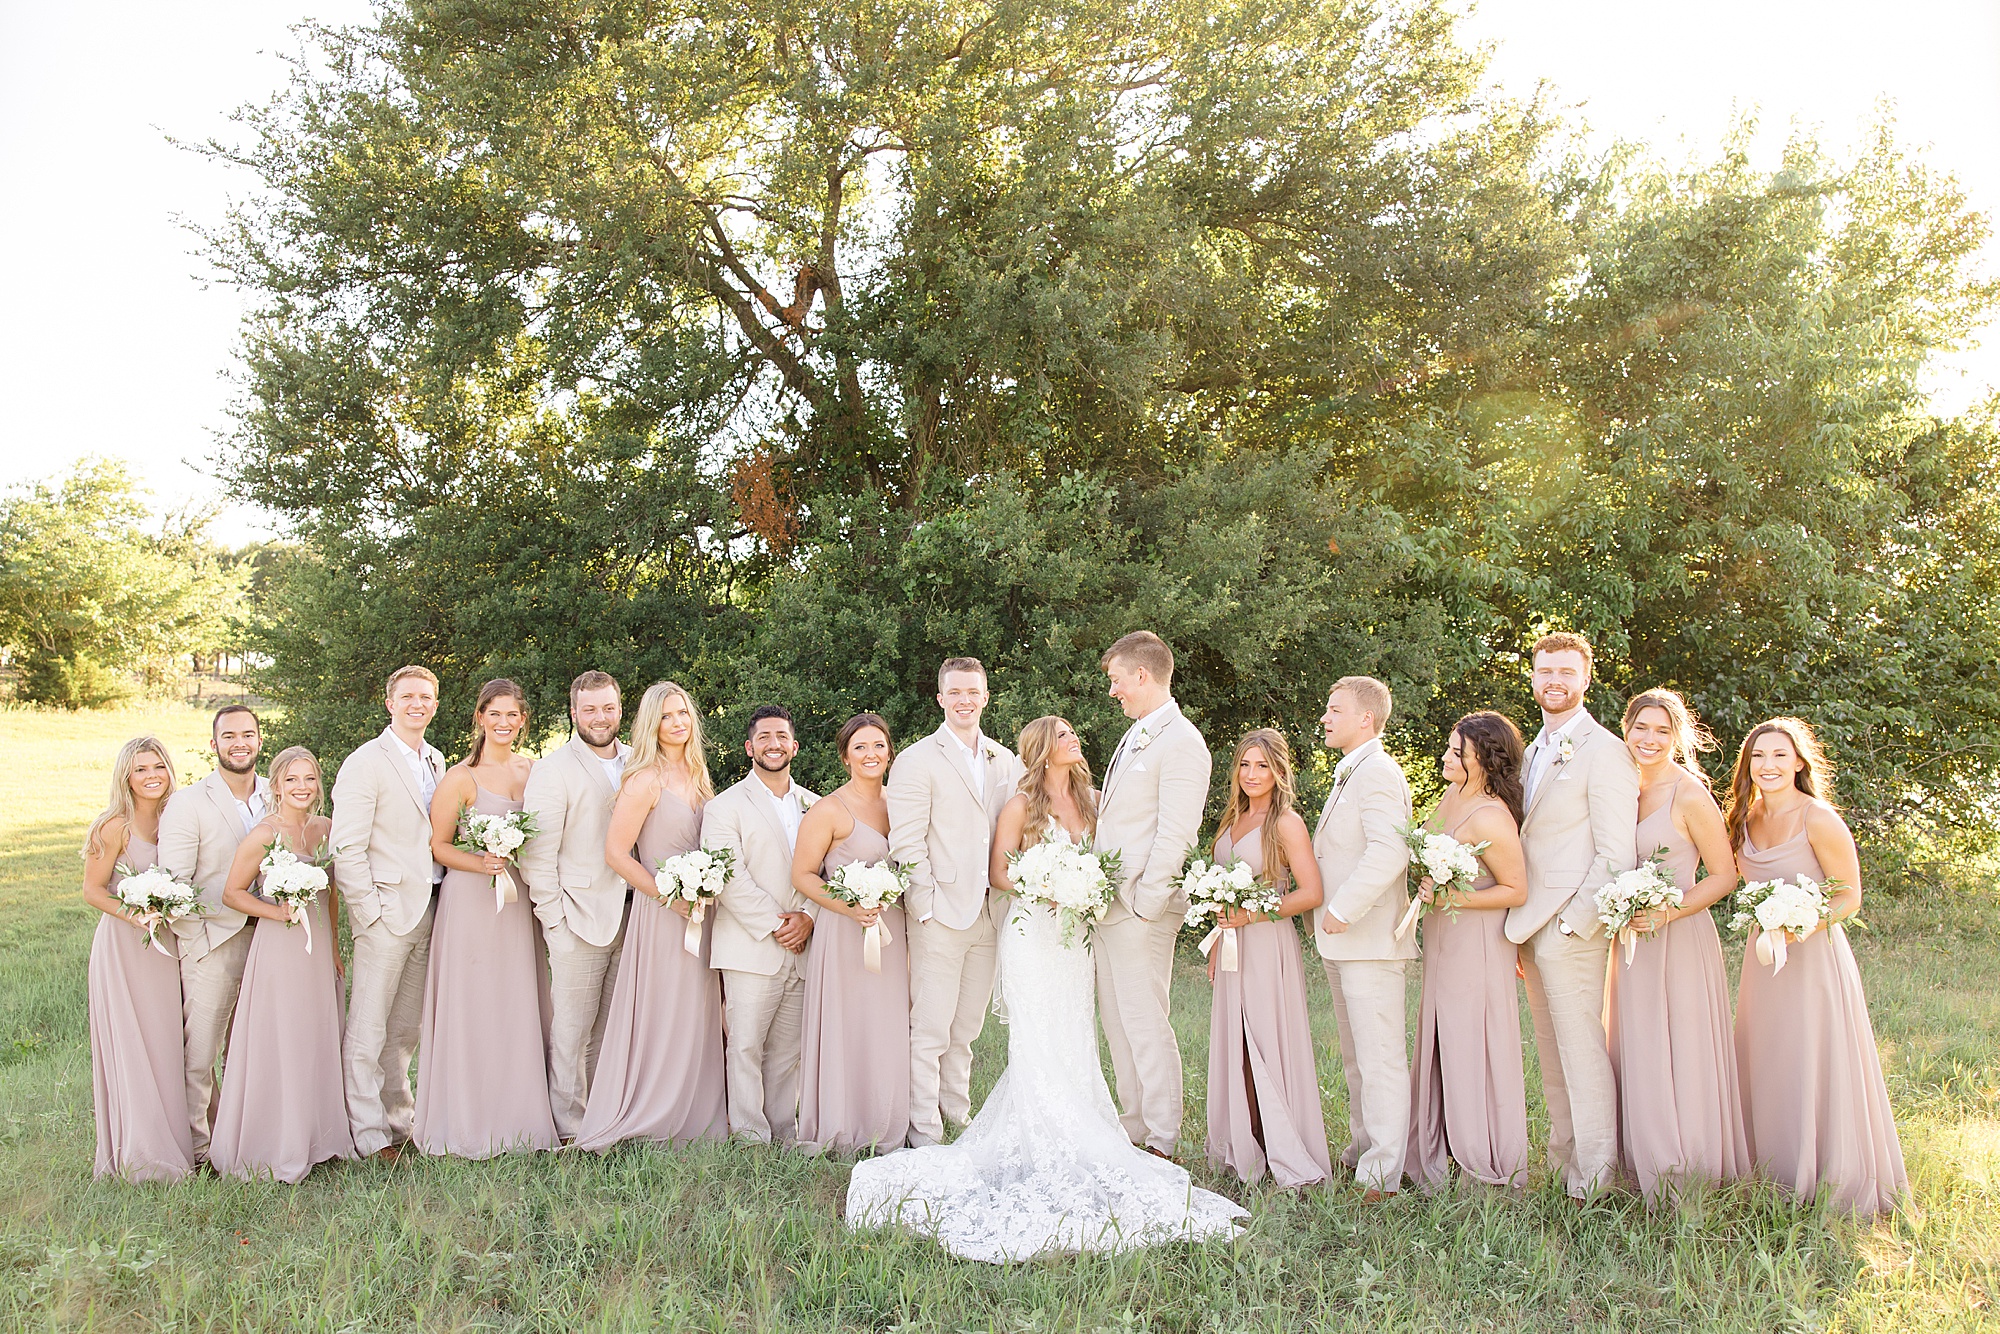 wedding party poses with bride and groom outside Dallas venue